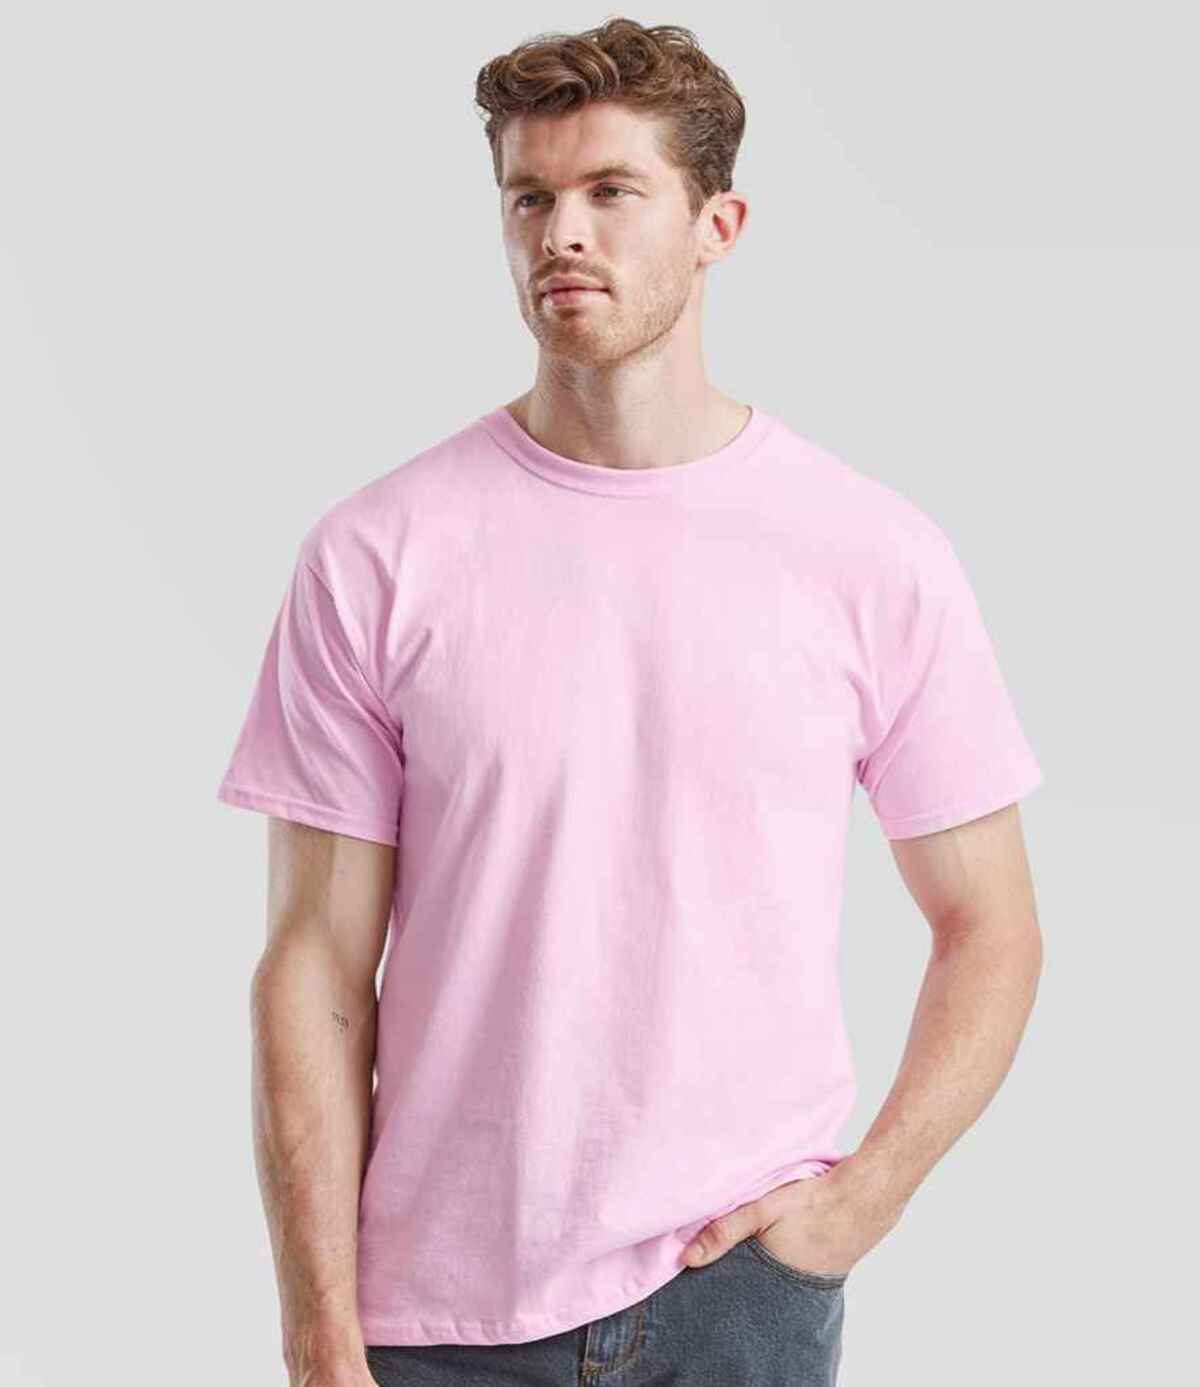 Fruit of the Loom Value T-Shirt - Light Pink